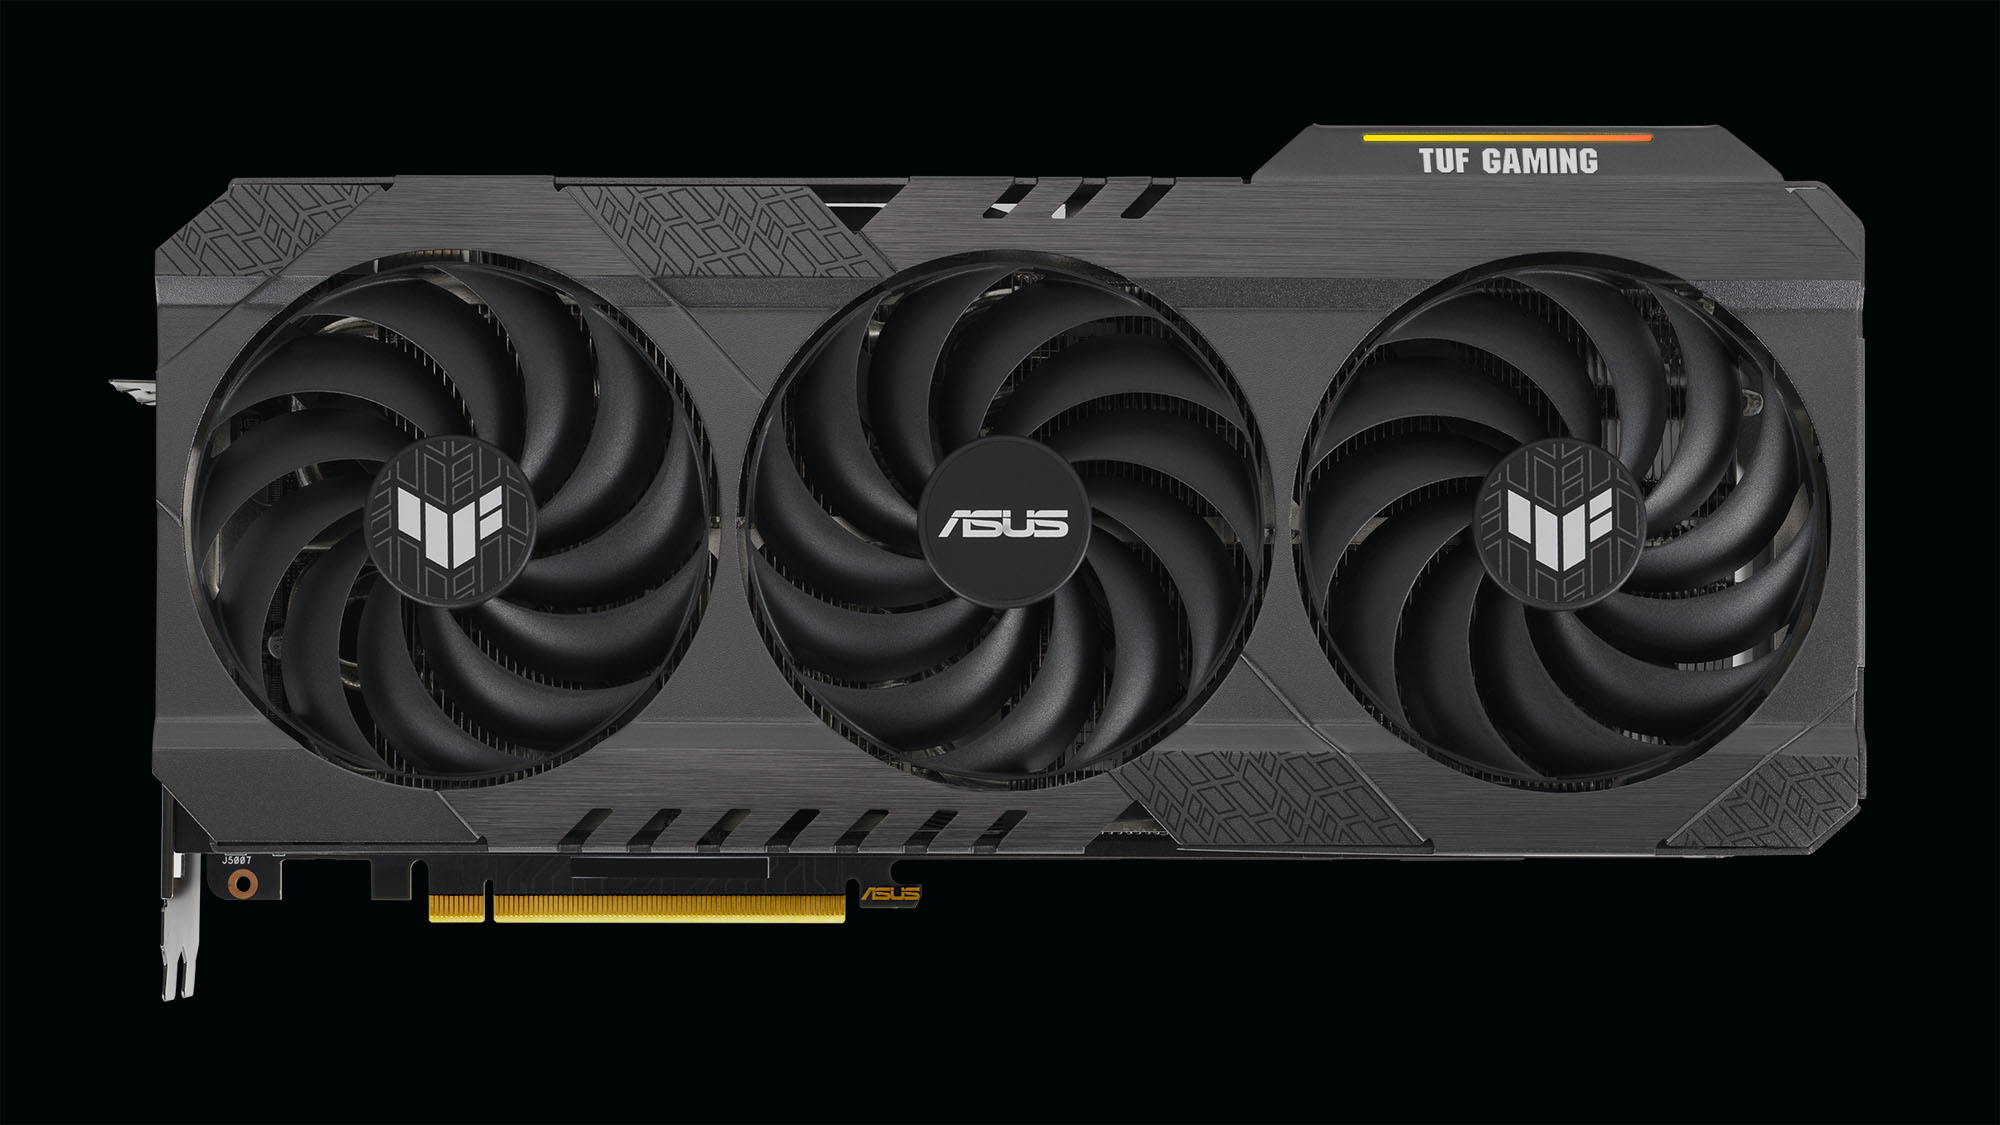 Asus Unveils Two Slimmer GeForce RTX 4090 Video Cards: ROG Strix LC and TUF  OG